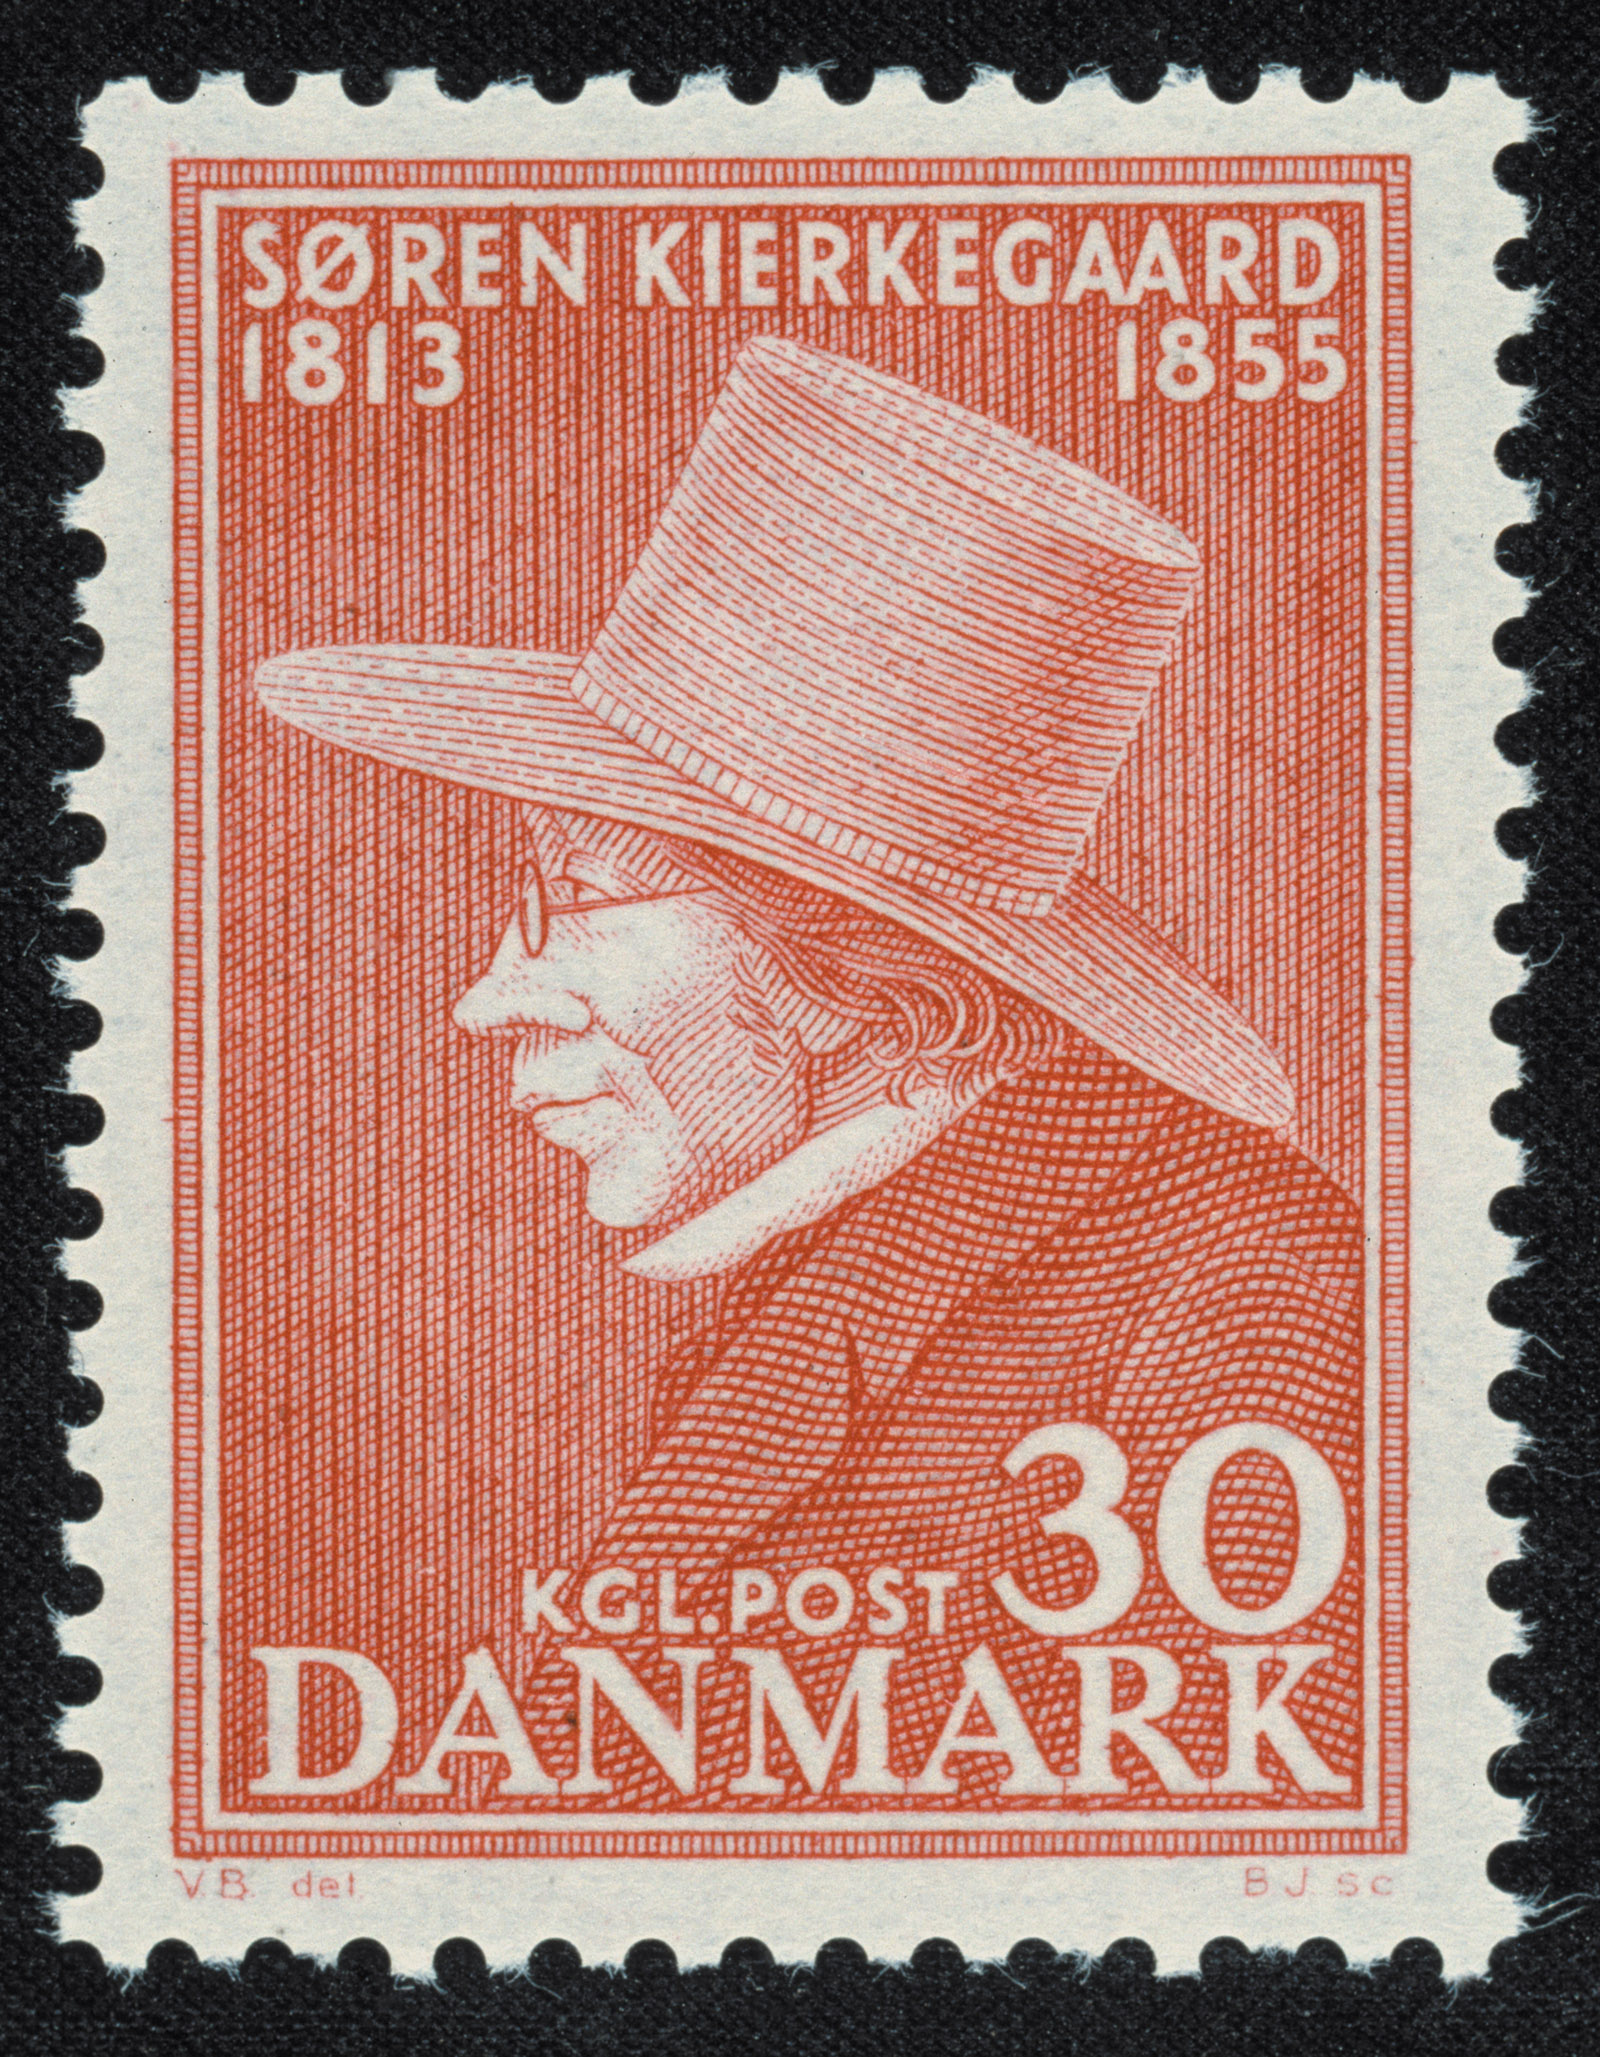 A Danish postage stamp issued in 1955 for the centennial of Søren Kierkegaard’s death